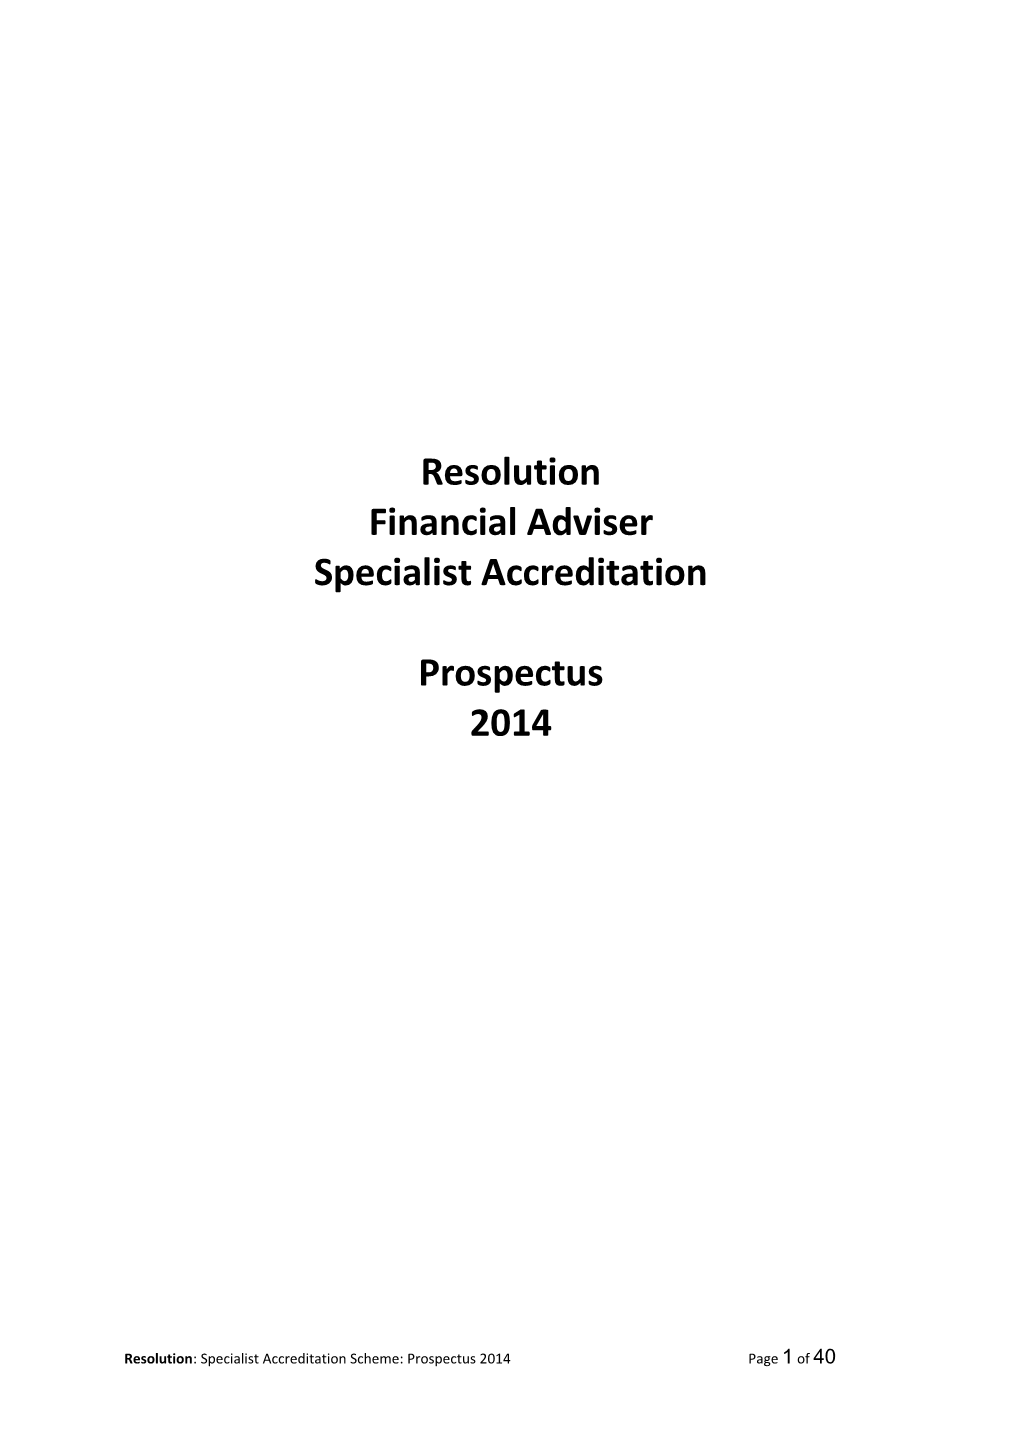 What Is Financial Adviser Specialist Accreditation?